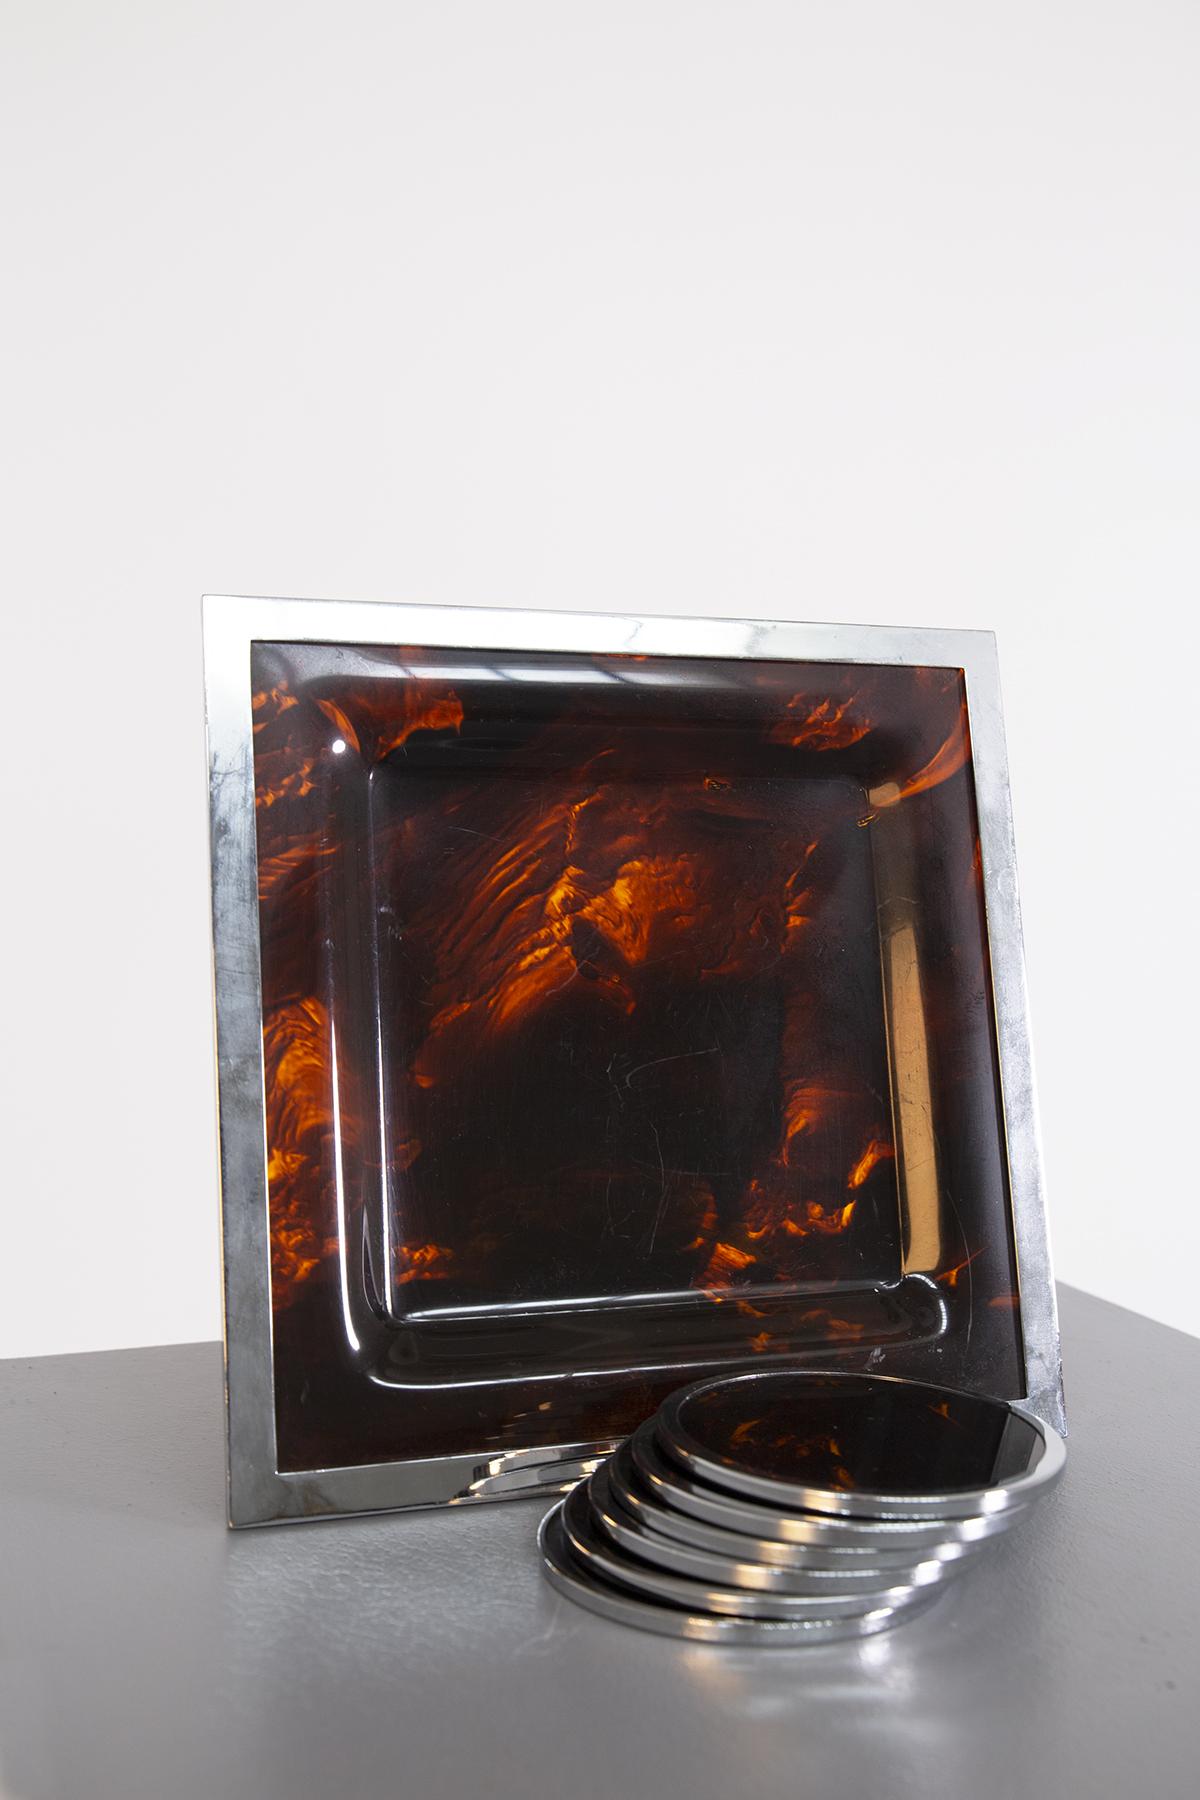 Wonderful 1970's Italian service set in lucite, simulating a tortoiseshell effect, attributed to the Christian Dior Manufacture.
This is an iconic square serving tray or platter in tortoiseshell effect lucite with chrome steel edges. Completing the